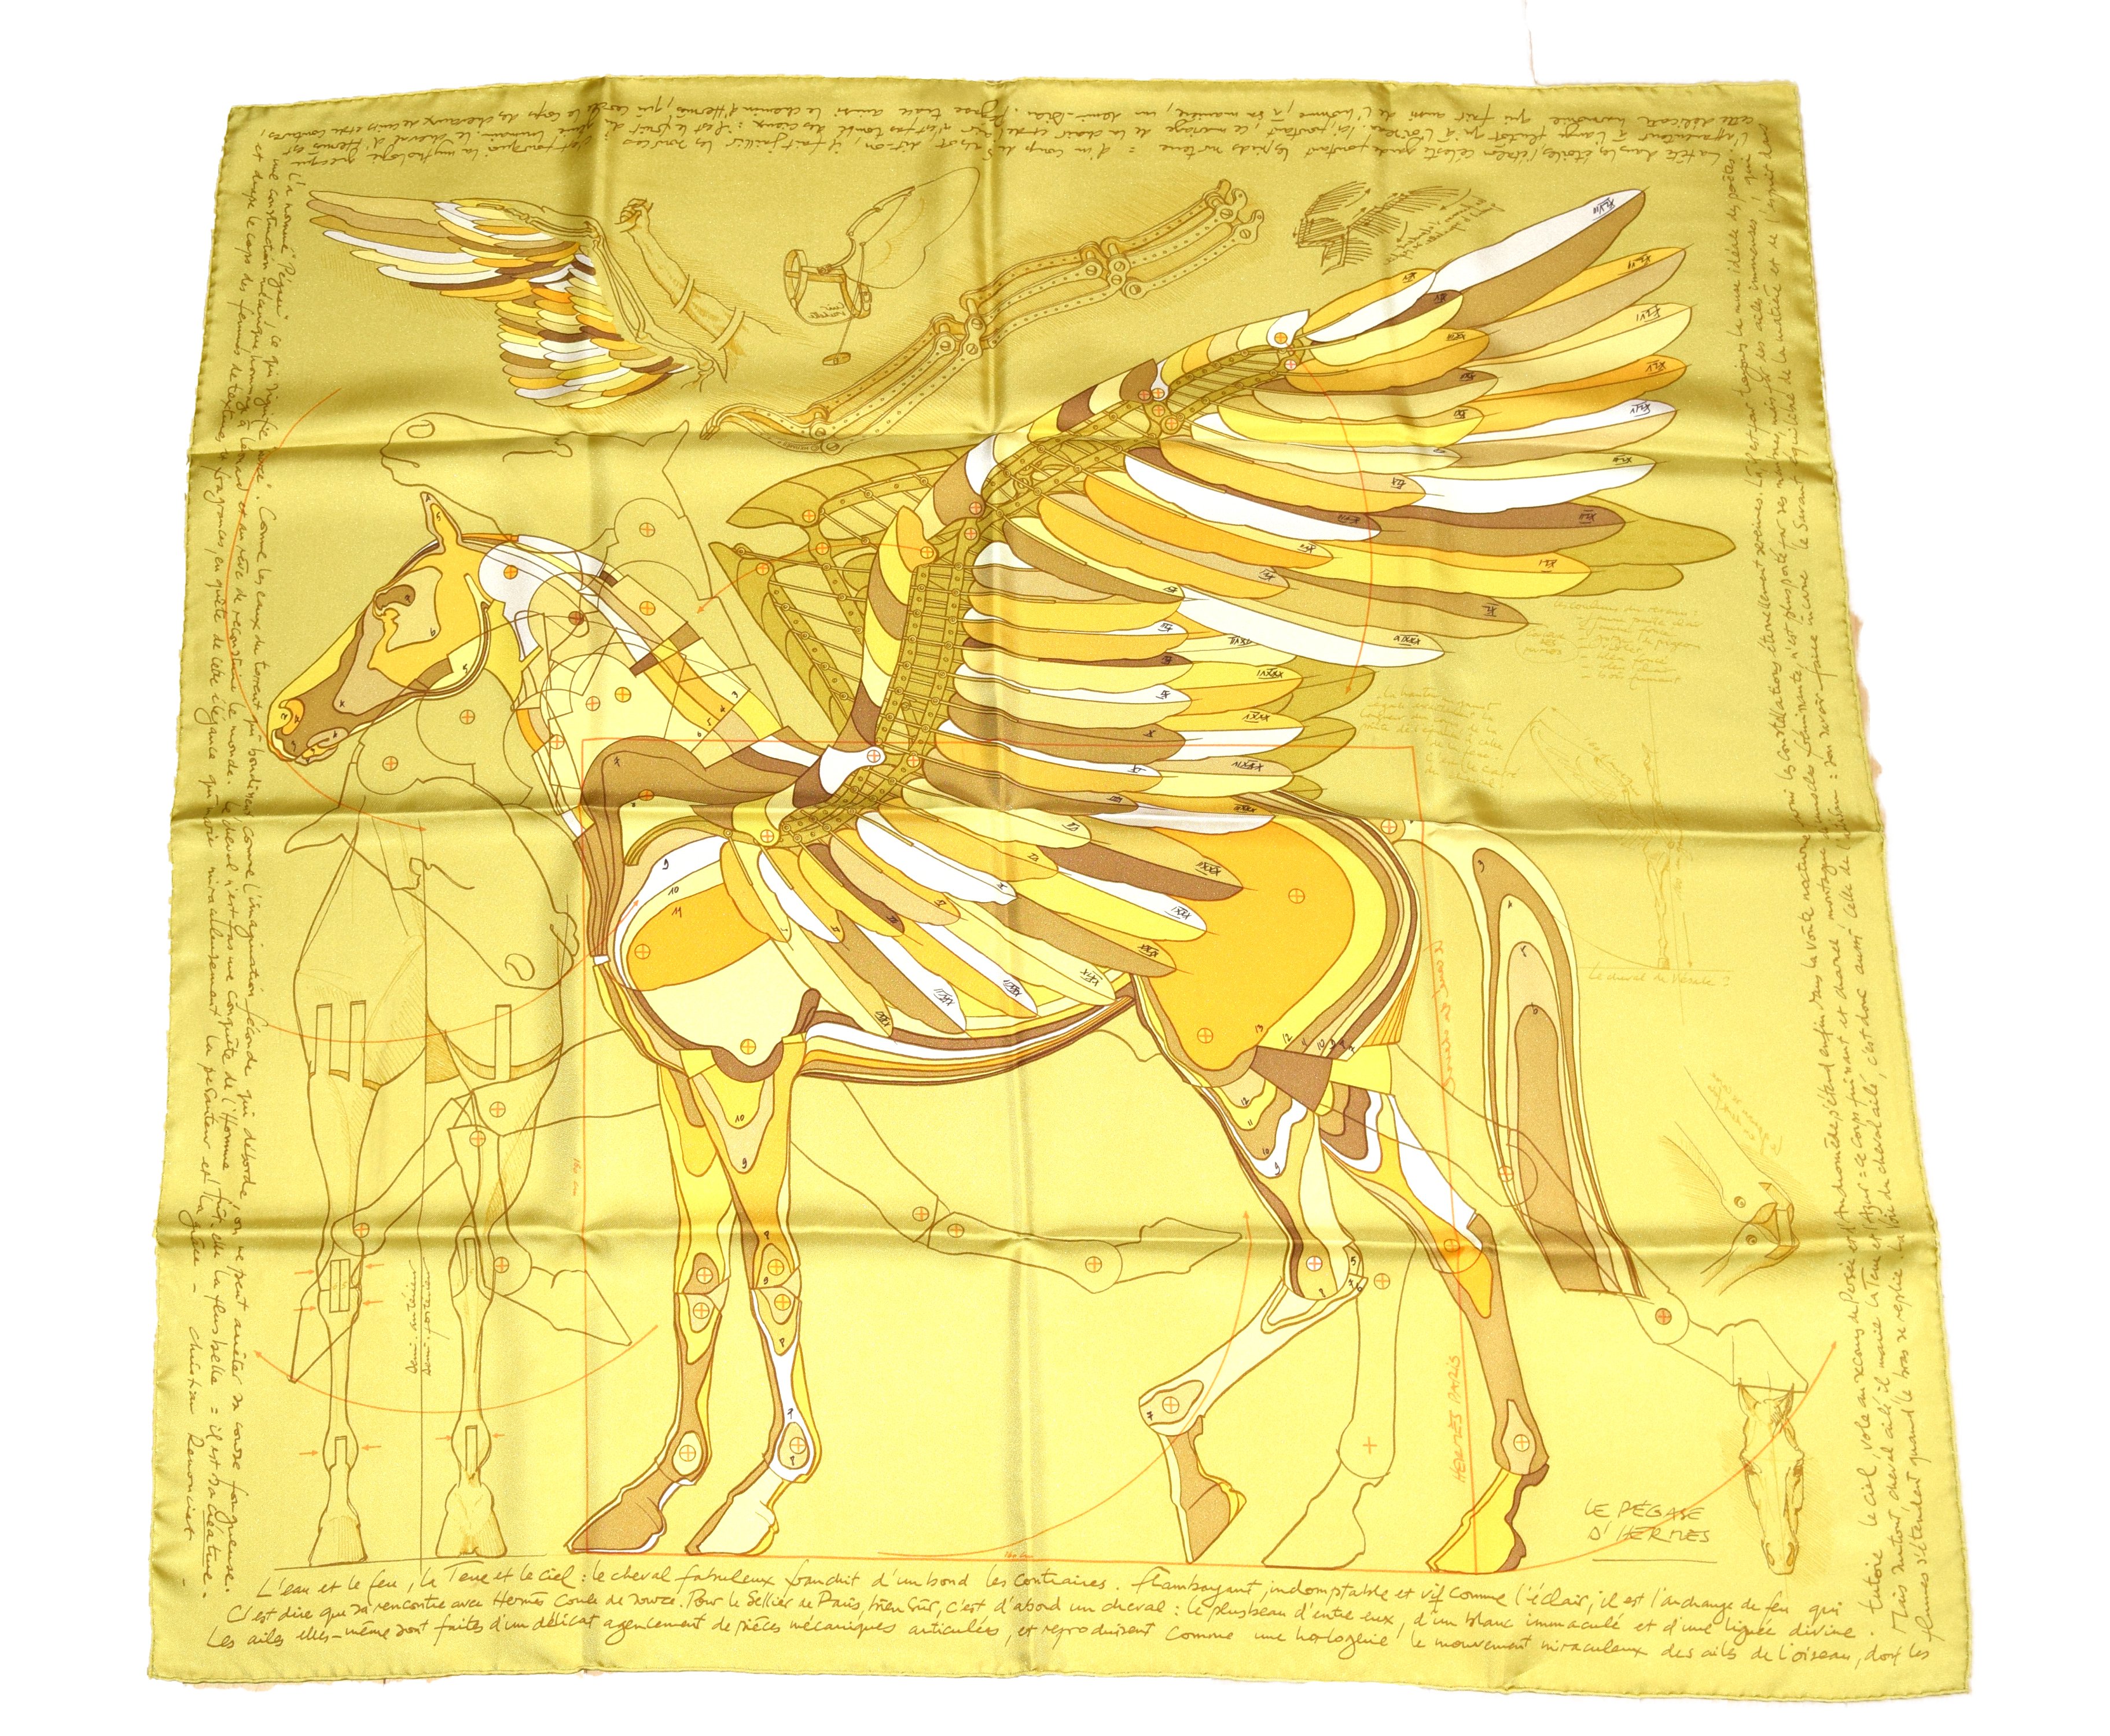 art Japan Export on X: Hermes Scarf Le Pegase d'Hermes by Christian  Renonciat Silk 90 cm Yellow is in sale now!!  #Hermes  #Scarf #carre #Shawl #vintage #Pegasus #ChristianRenonciat #LePegase   /